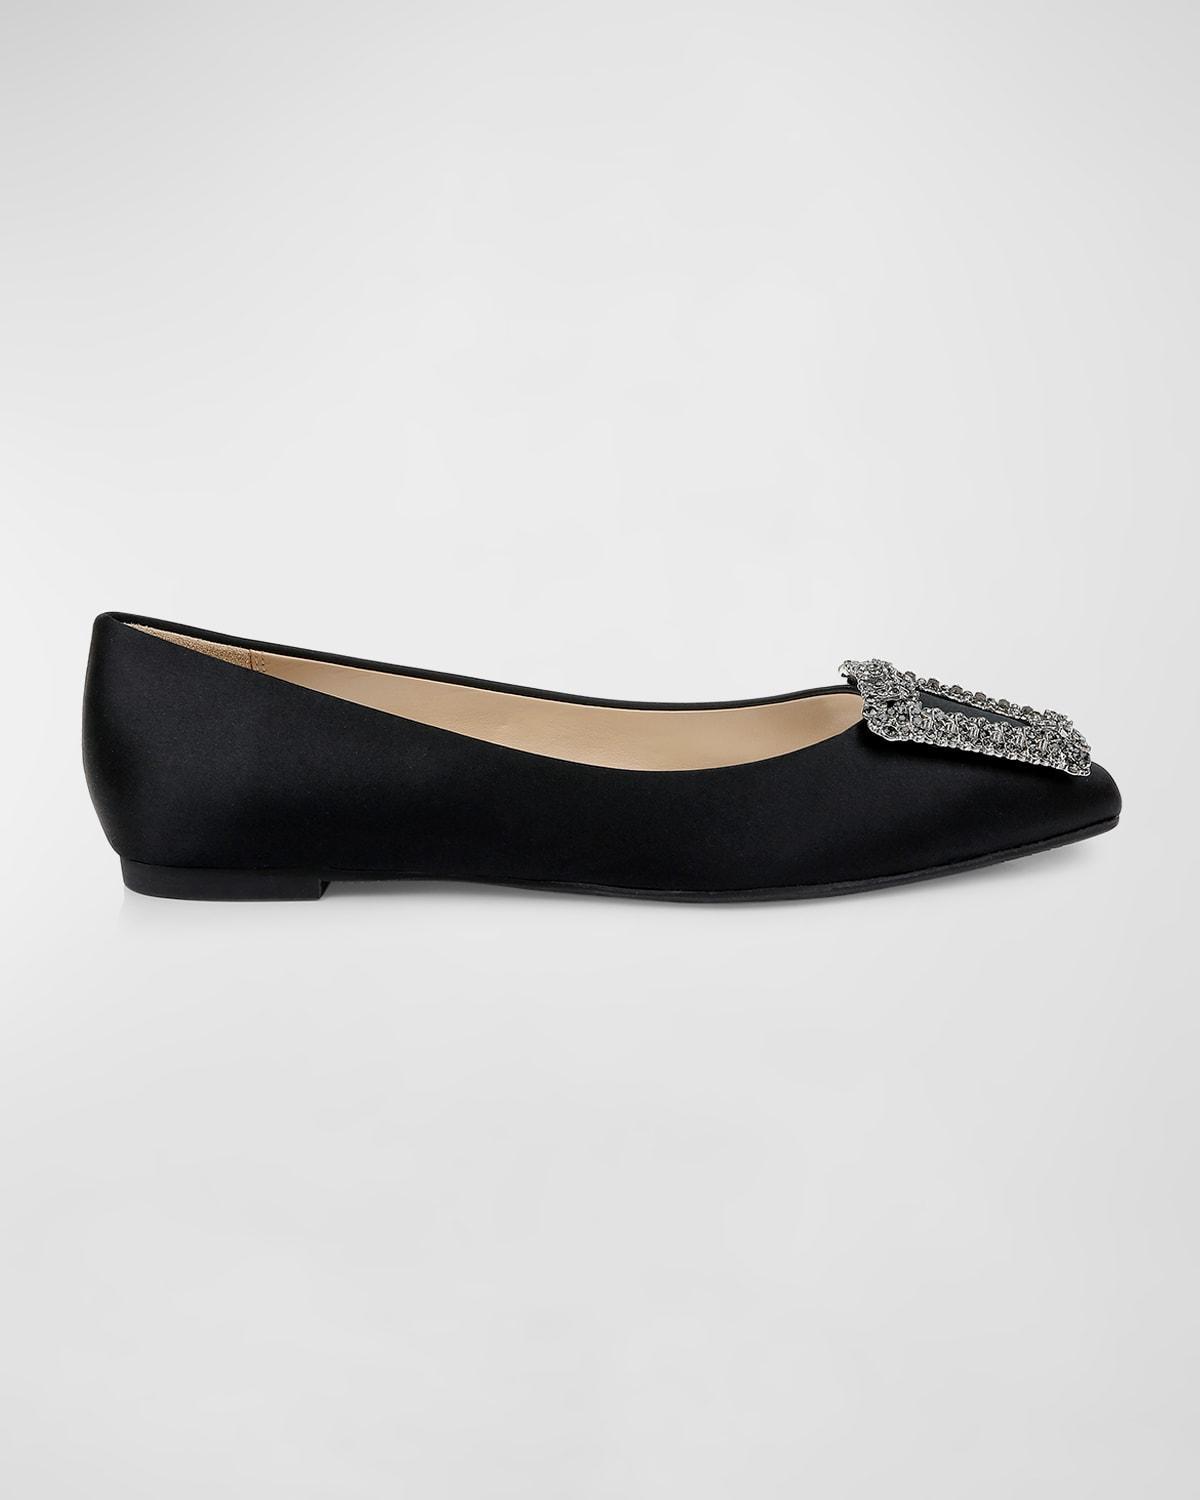 Badgley Mischka Collection Emerie Flat Product Image